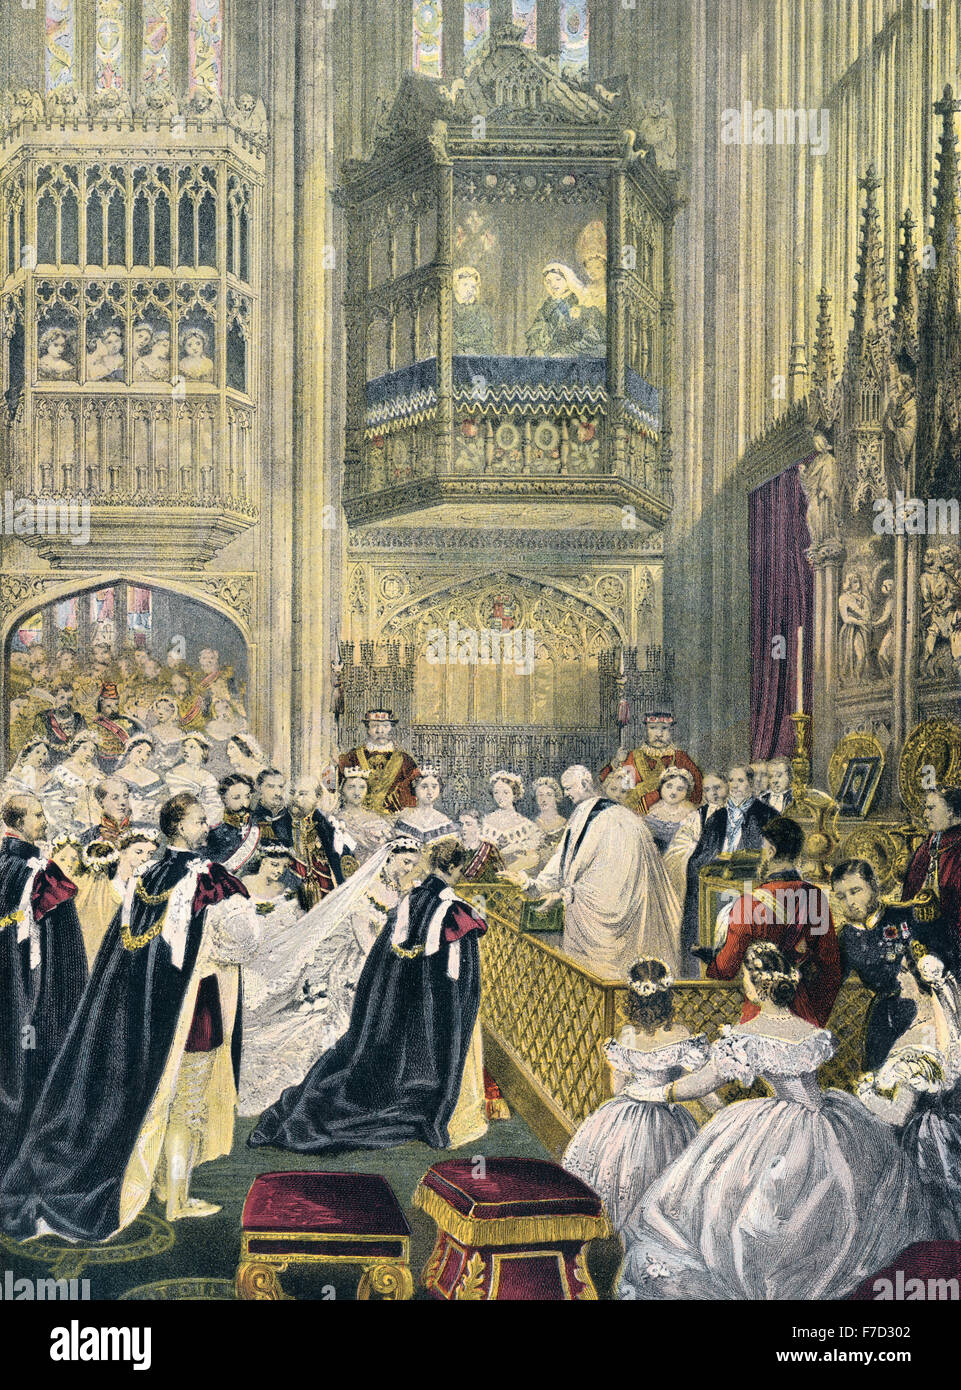 Wedding of Albert Edward VII, Prince of Wales, and Princess Alexandra of Denmark in St. George’s Chapel, Windsor Castle, on 10 M Stock Photo